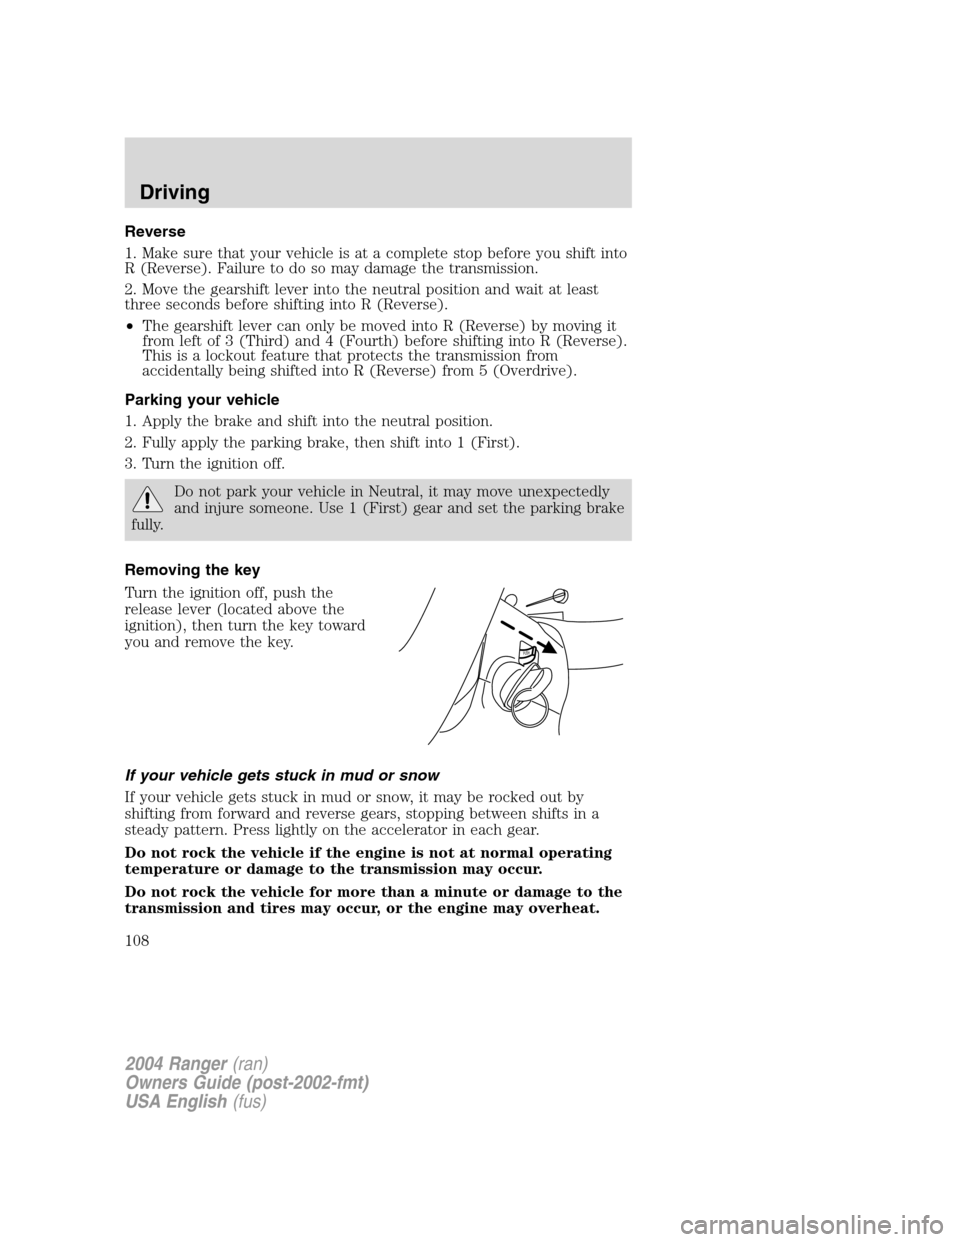 FORD RANGER 2004 2.G Owners Manual Reverse
1. Make sure that your vehicle is at a complete stop before you shift into
R (Reverse). Failure to do so may damage the transmission.
2. Move the gearshift lever into the neutral position and 